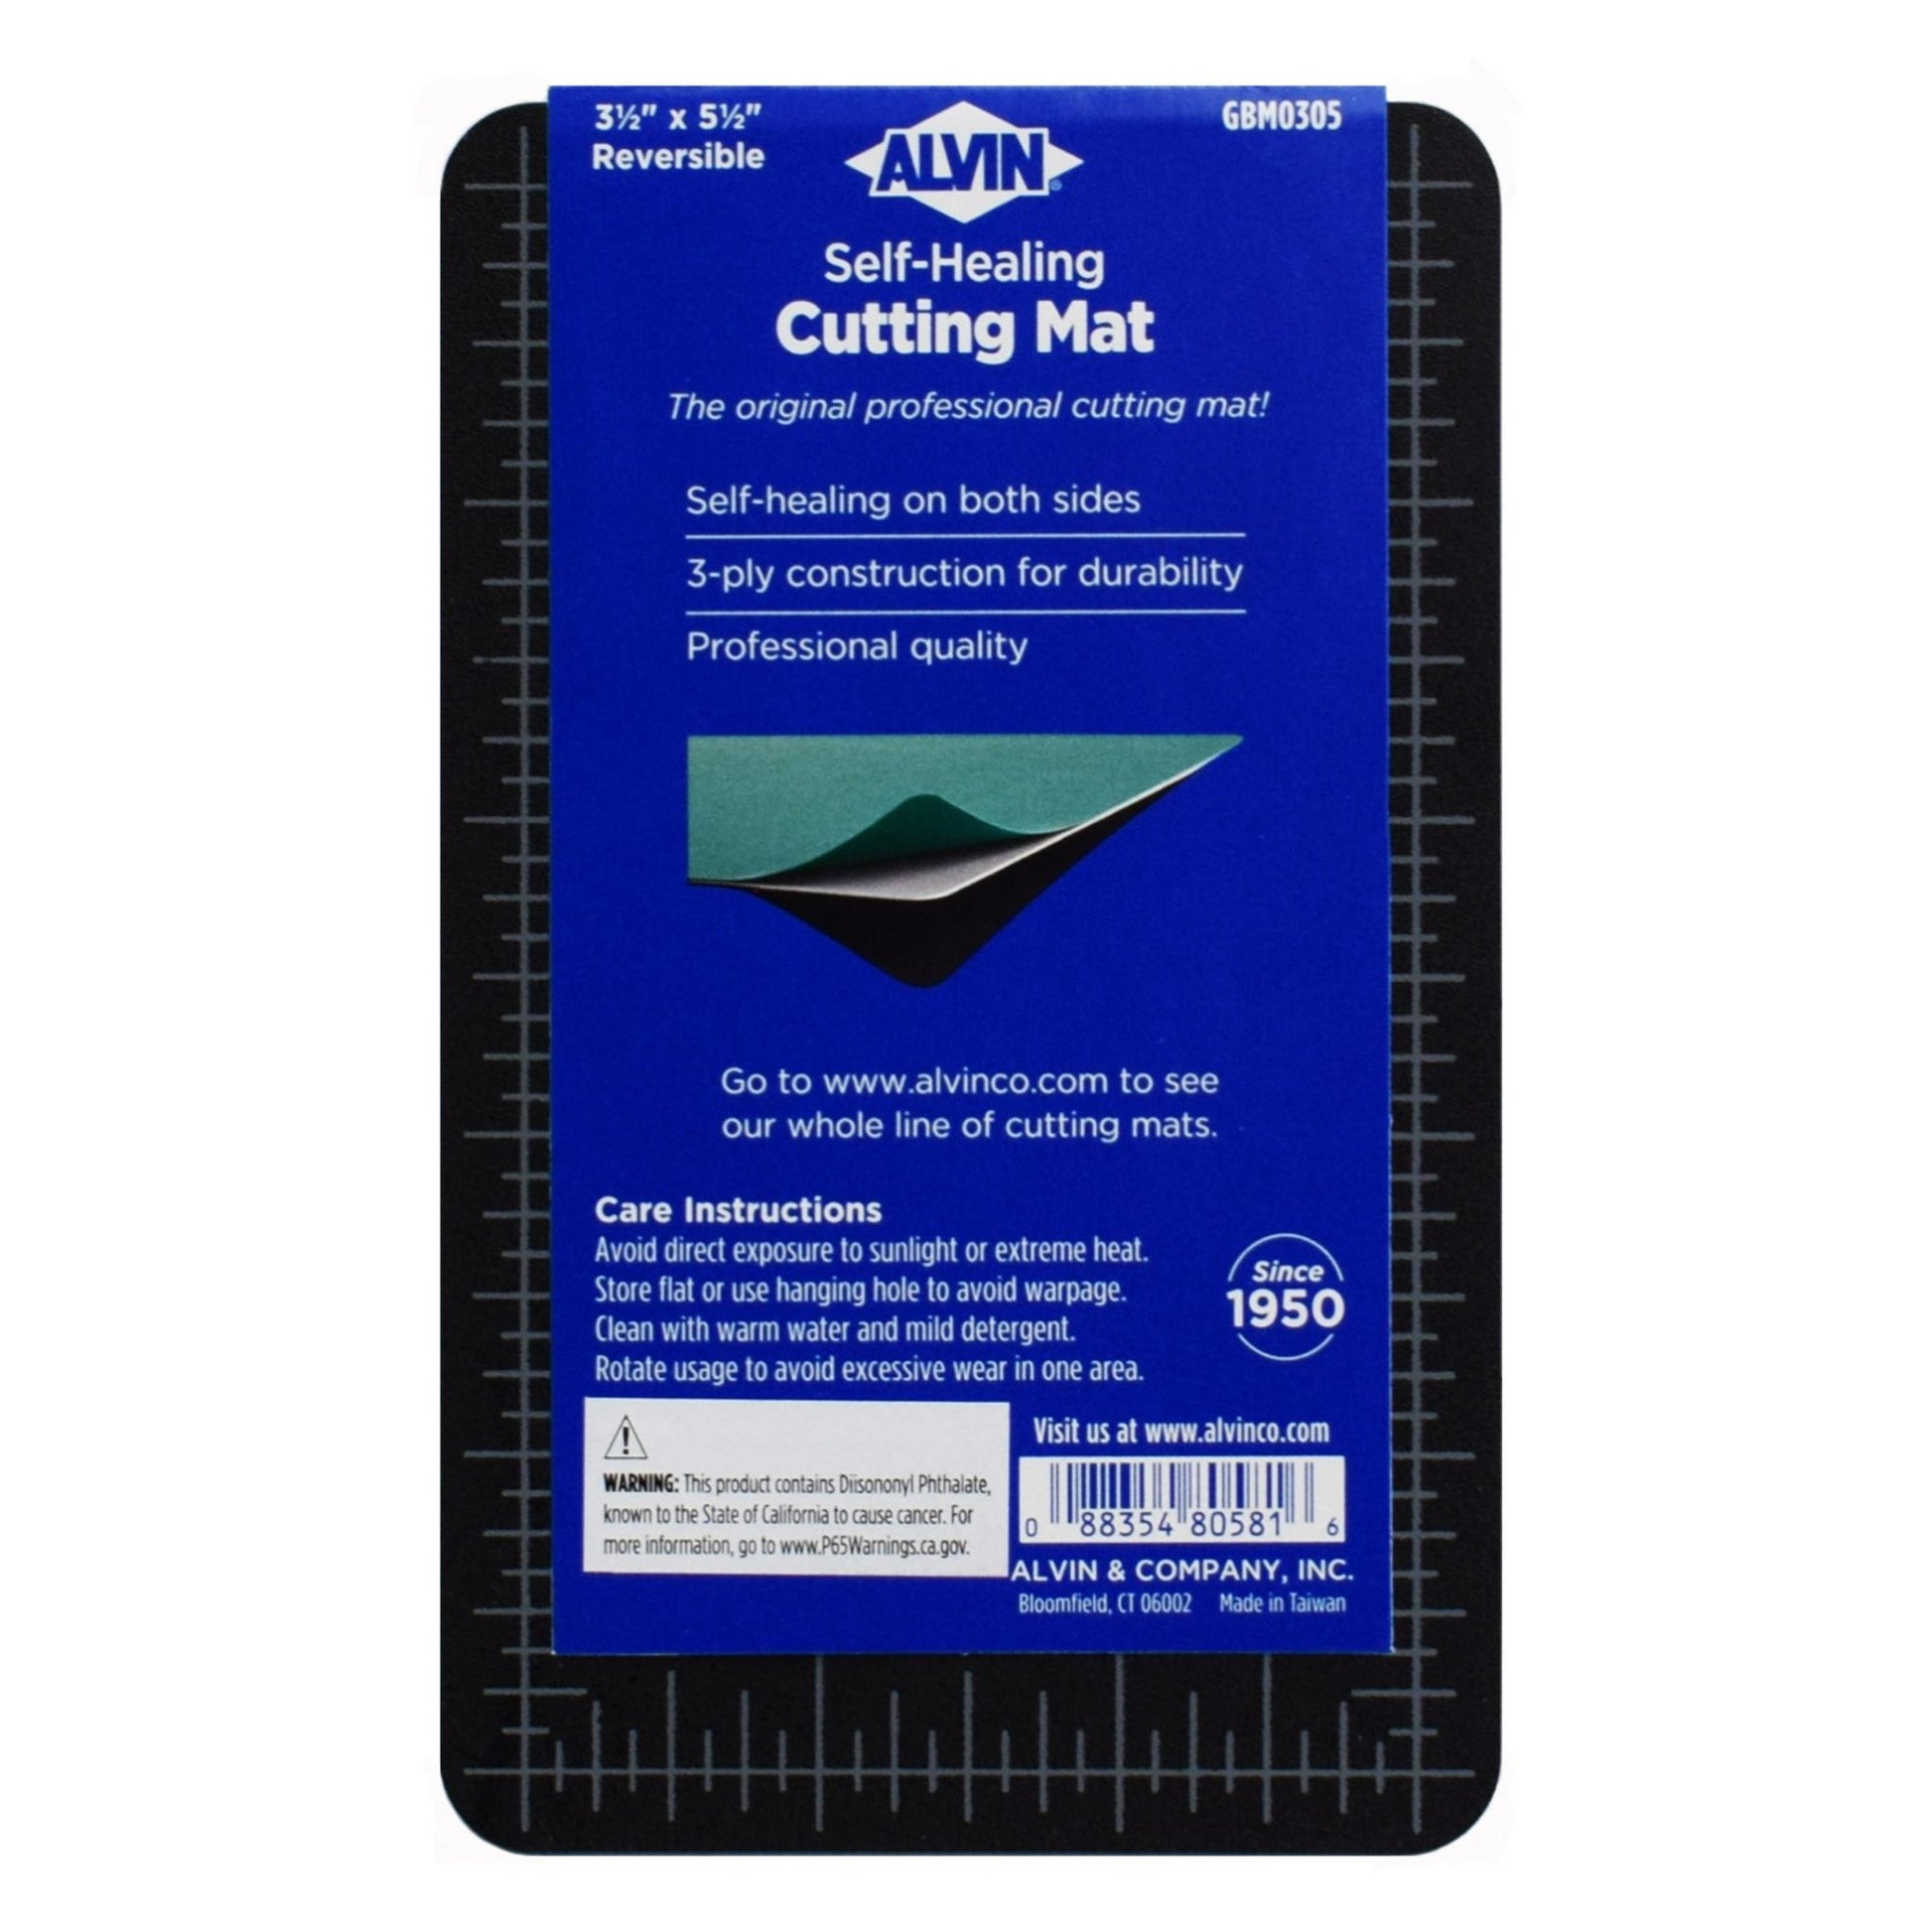 ALVIN Cutting Mat Professional Self-Healing 30x42 Model GBM3042 Large,  Green/Black Double-Sided, Gridded Rotary Cutting Board for Crafts, Sewing